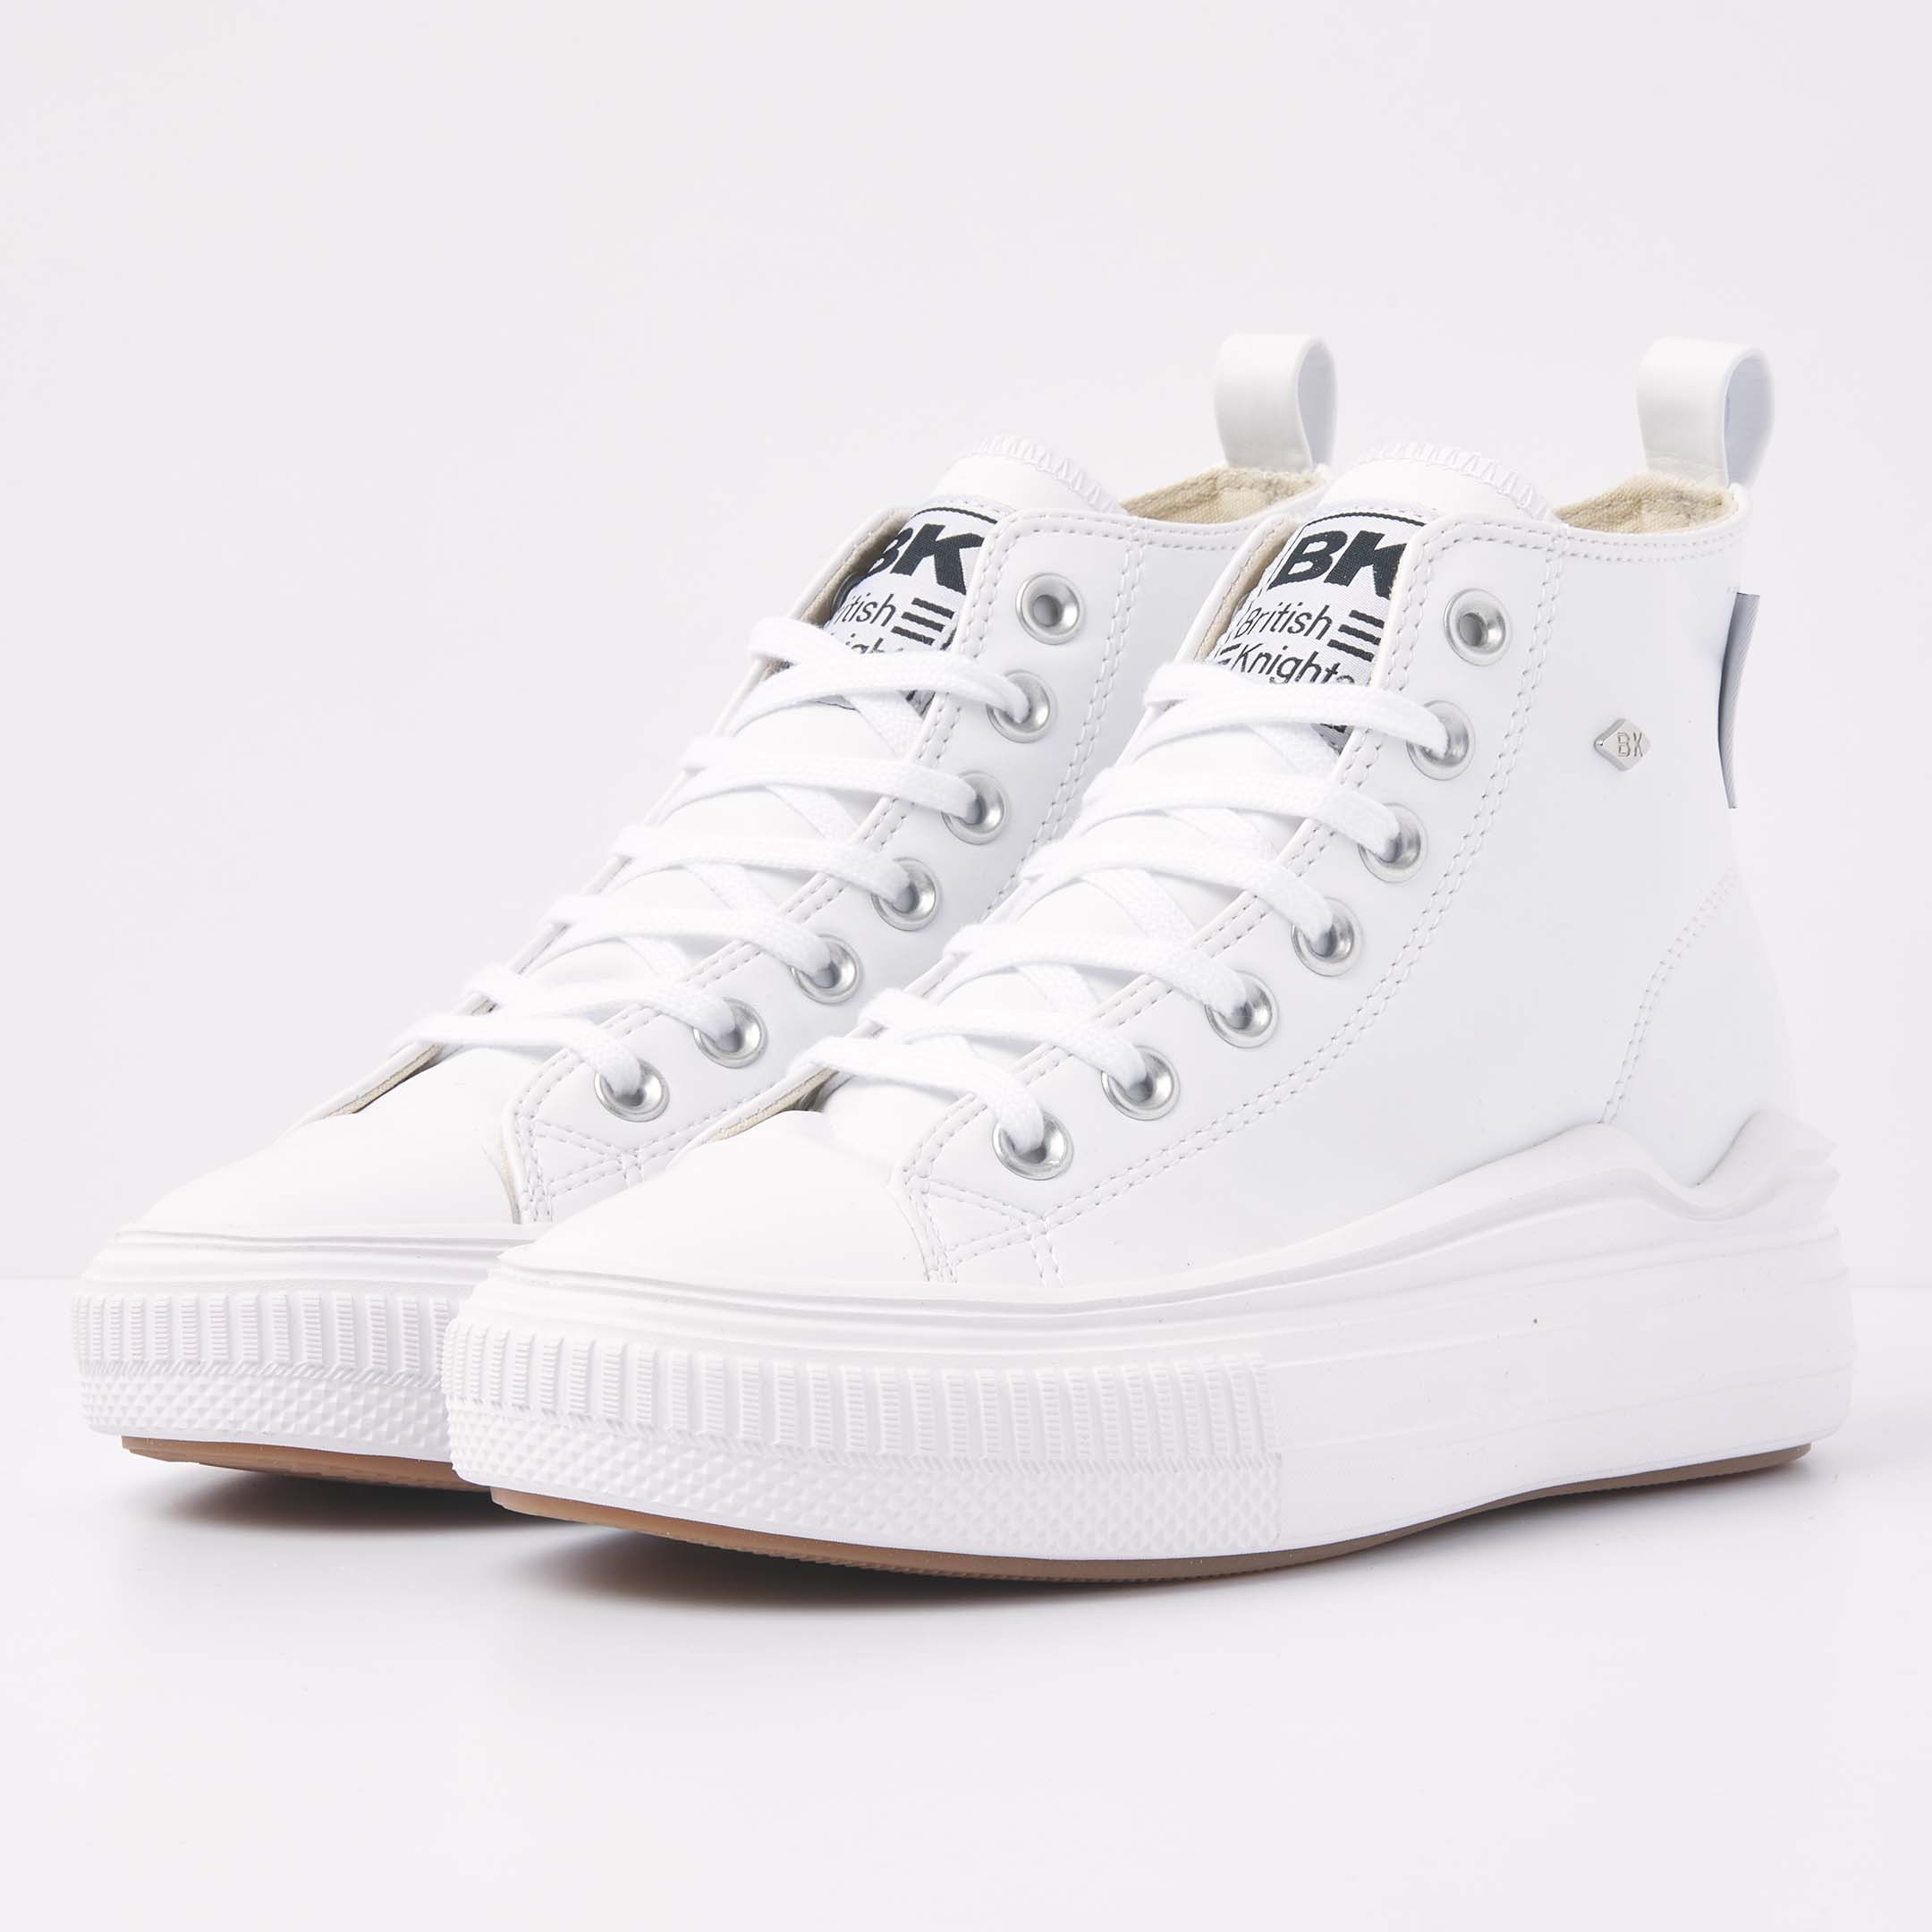 British Knights Sneaker Front view  B51-3735-02 KAYA FLOW MID HIGH-TOP FEMALE